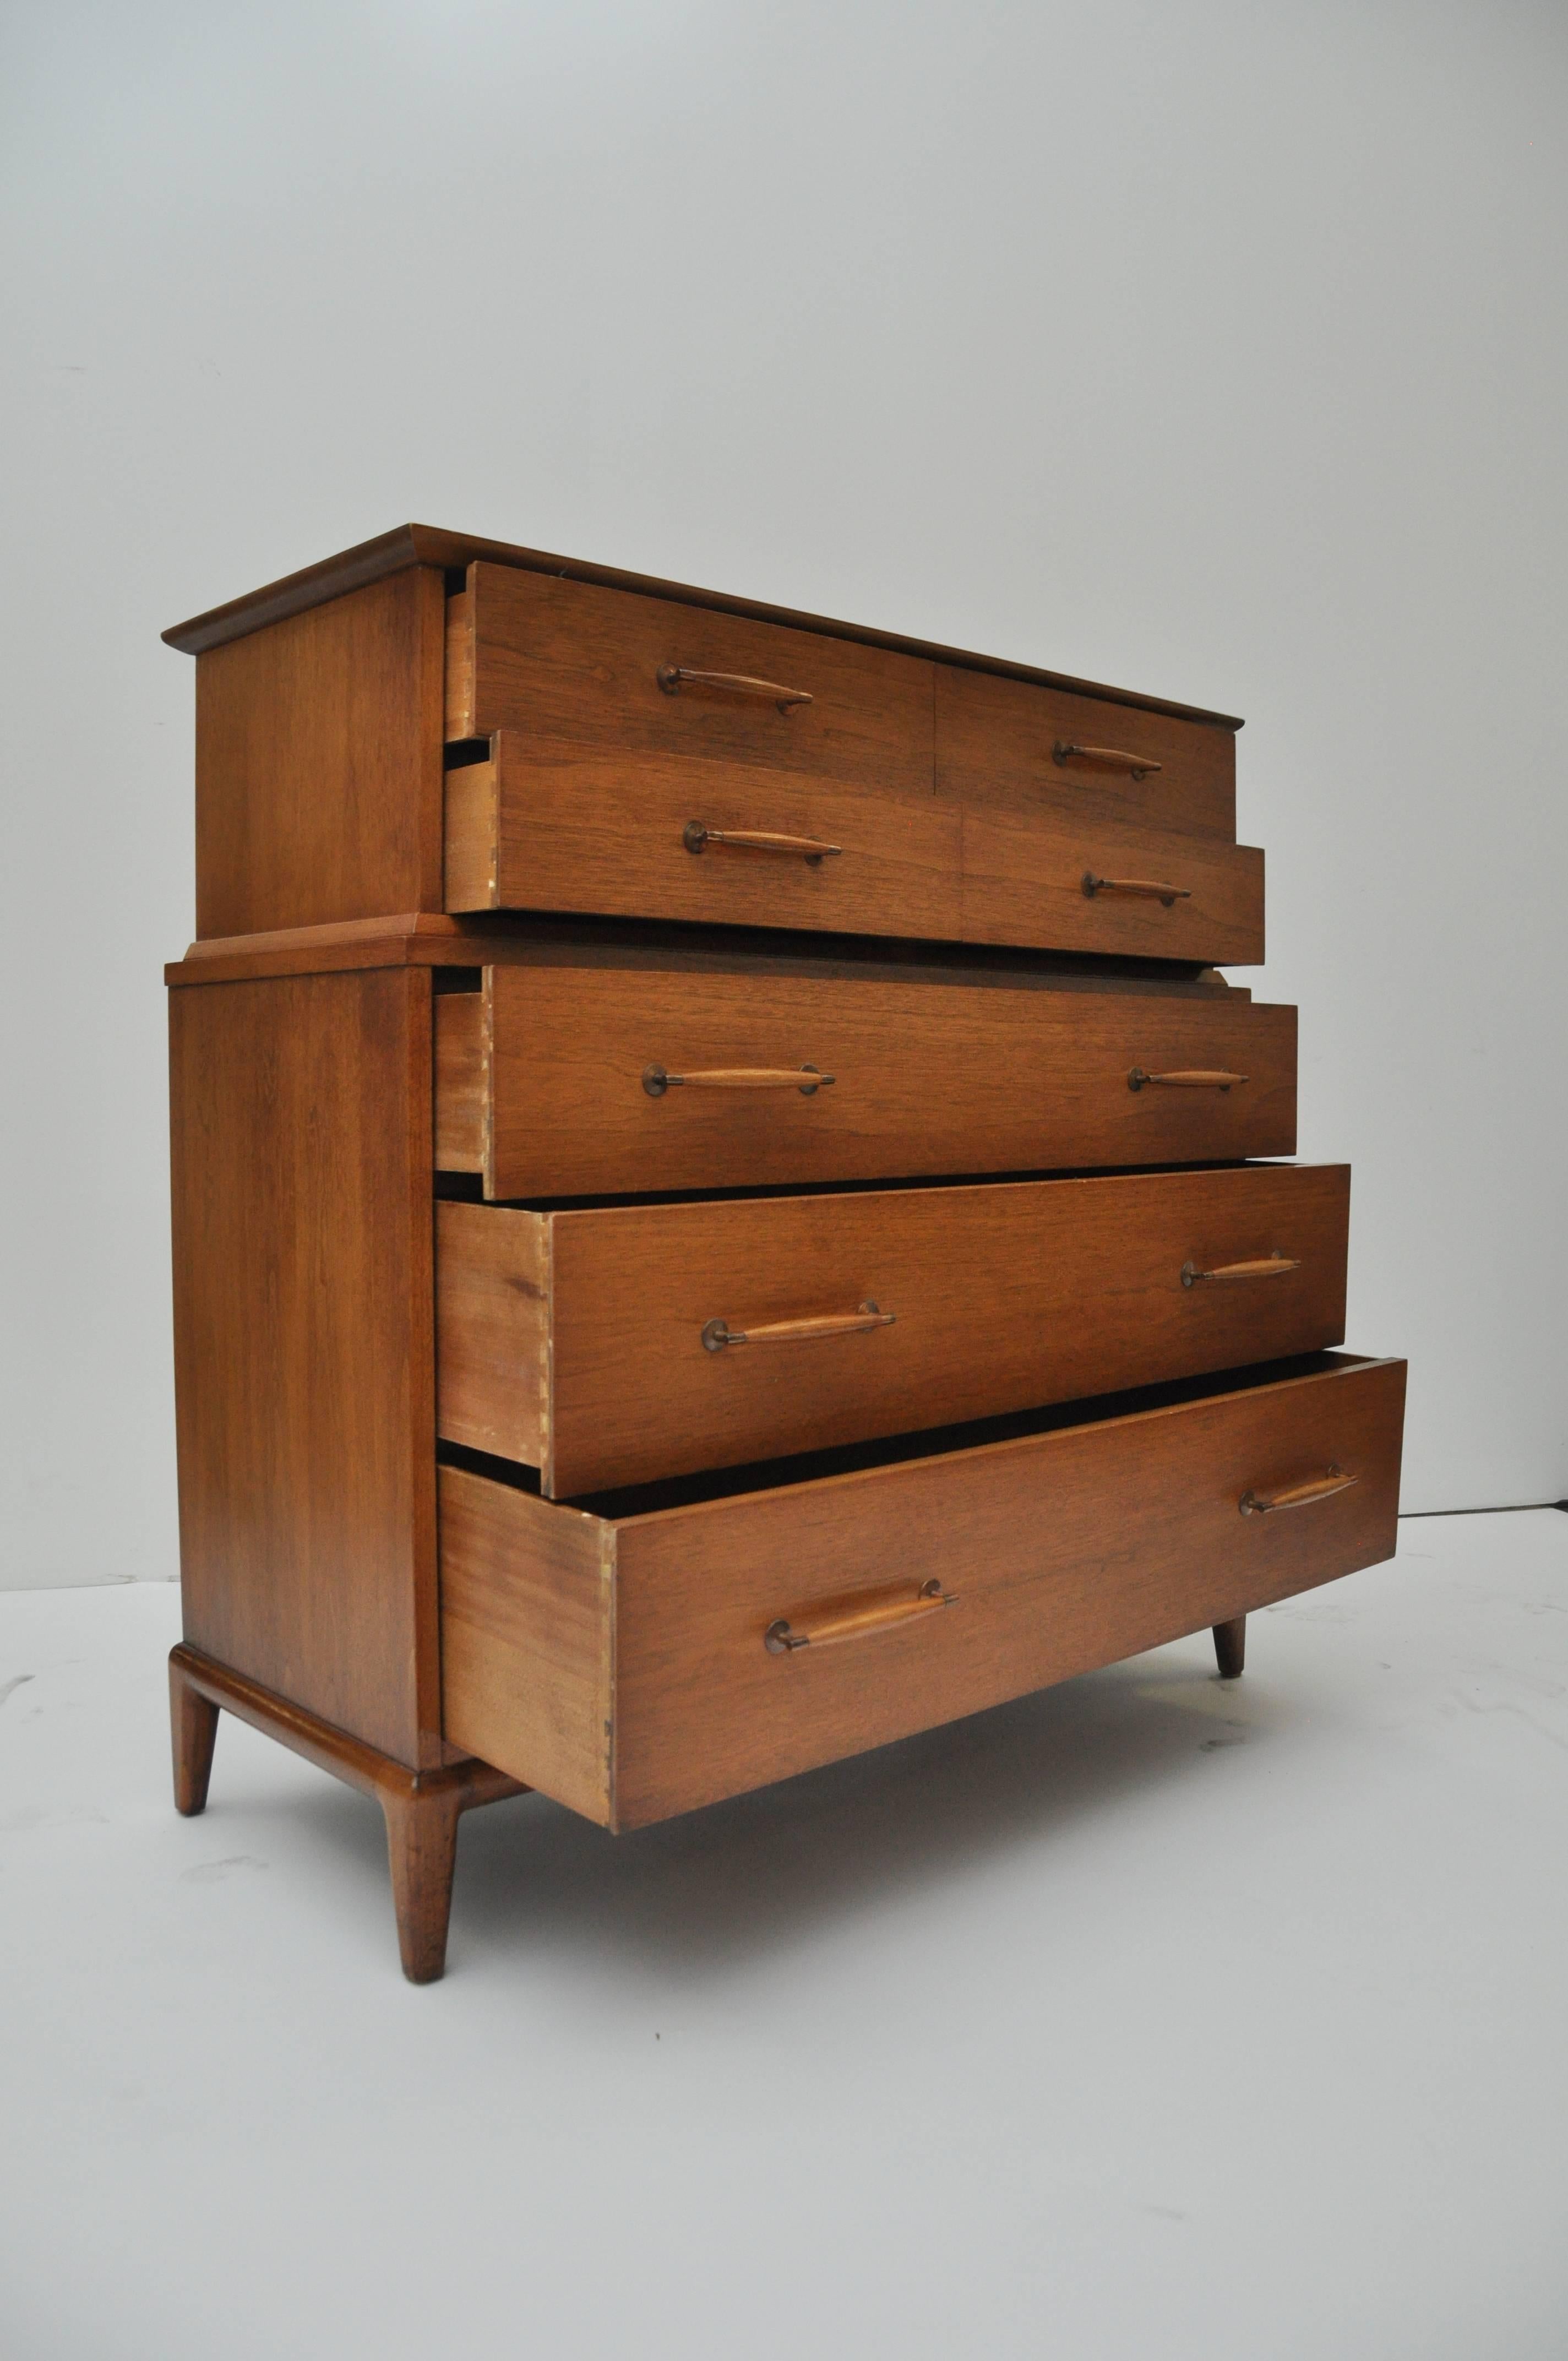 Chest has five drawers. It has copper and wooden hardware. Walnut with distinct grain and has two inset detailed wooden strips to accent the top.